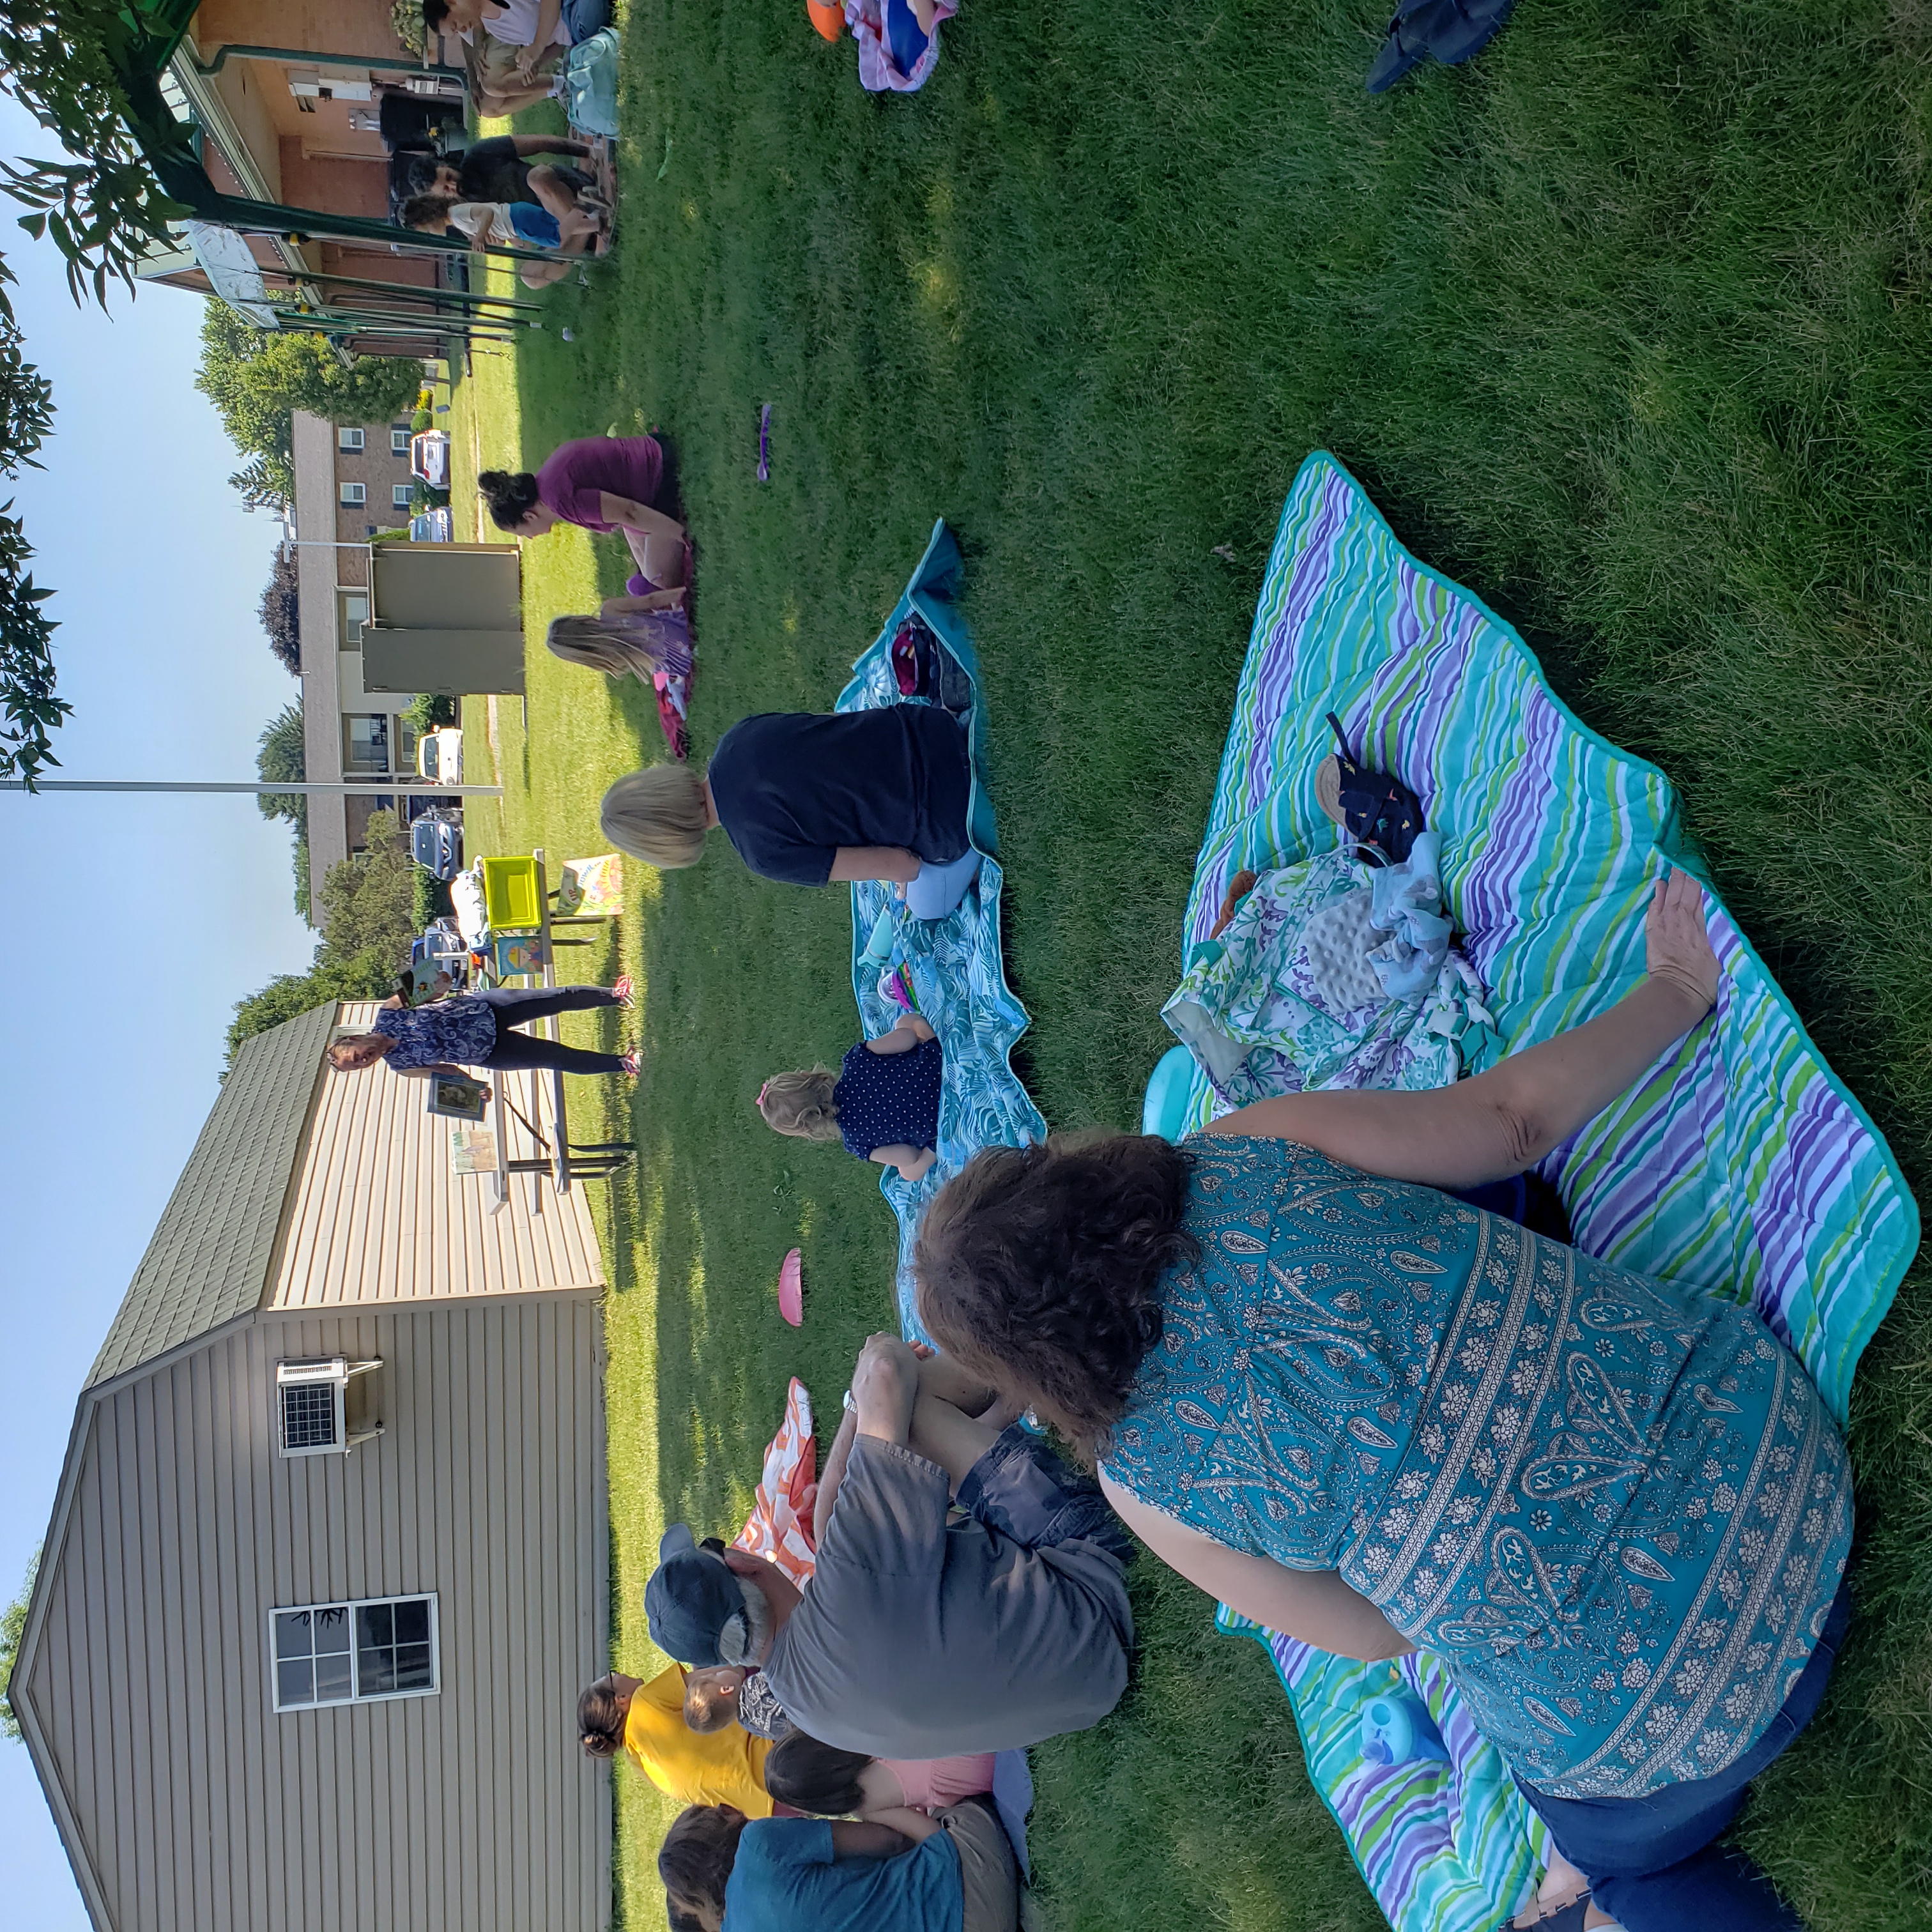 people sitting on blankets on grass while Miss Jan reads stories